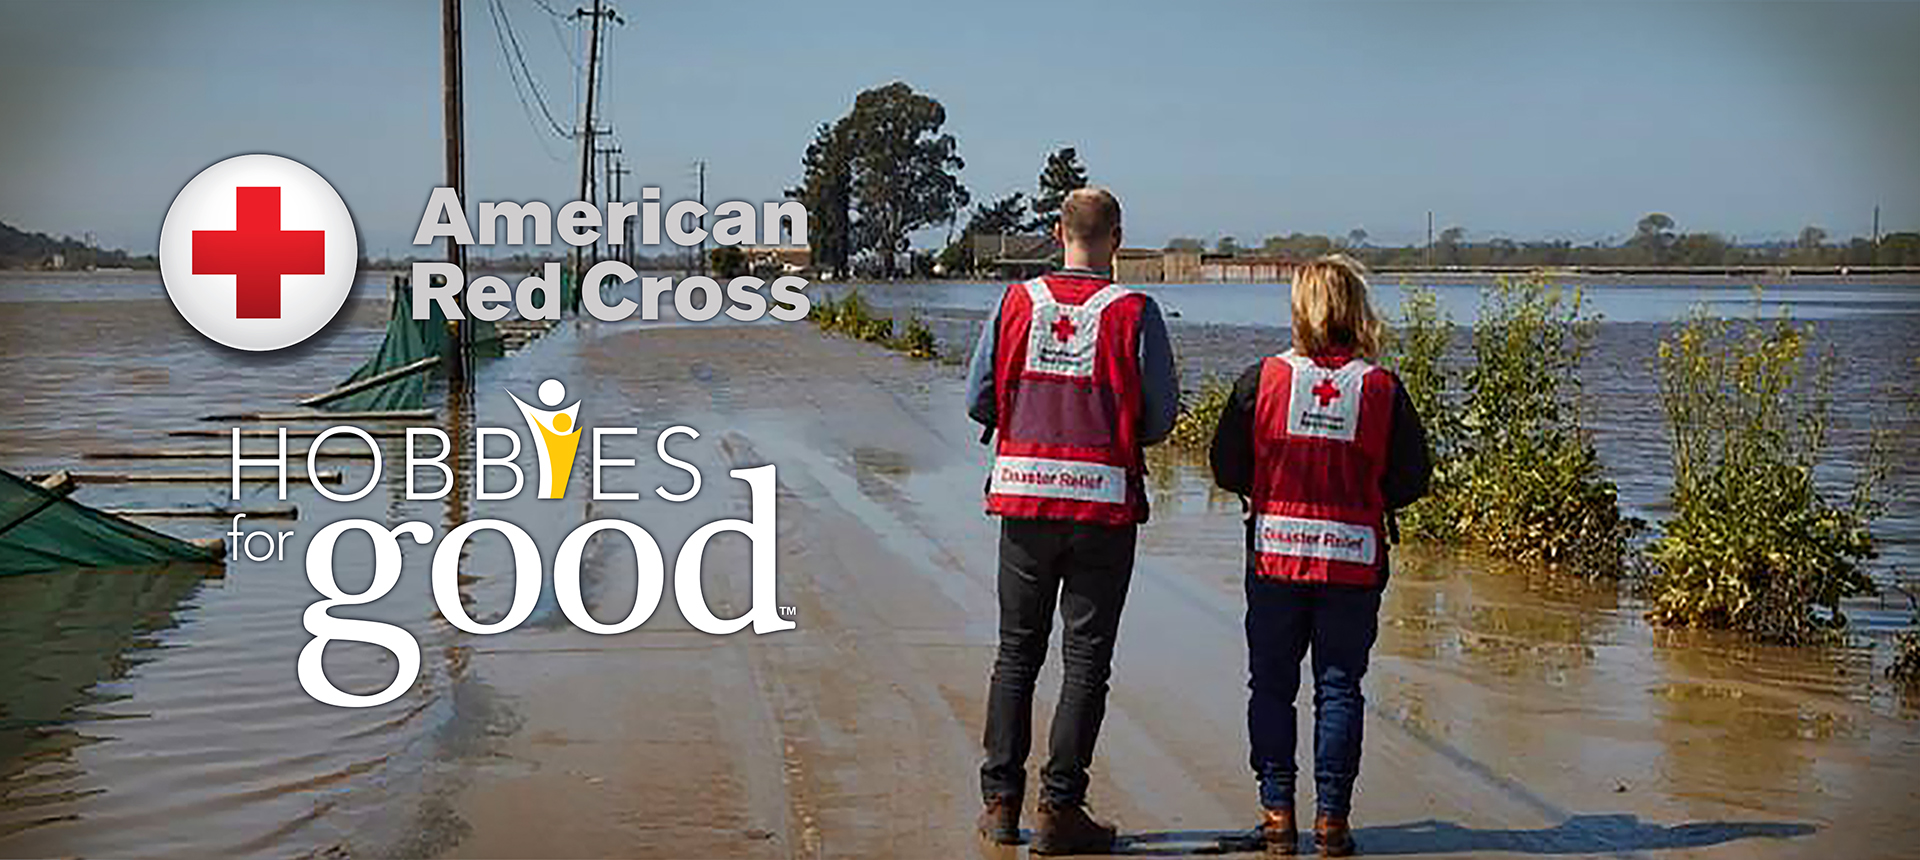 The american red cross